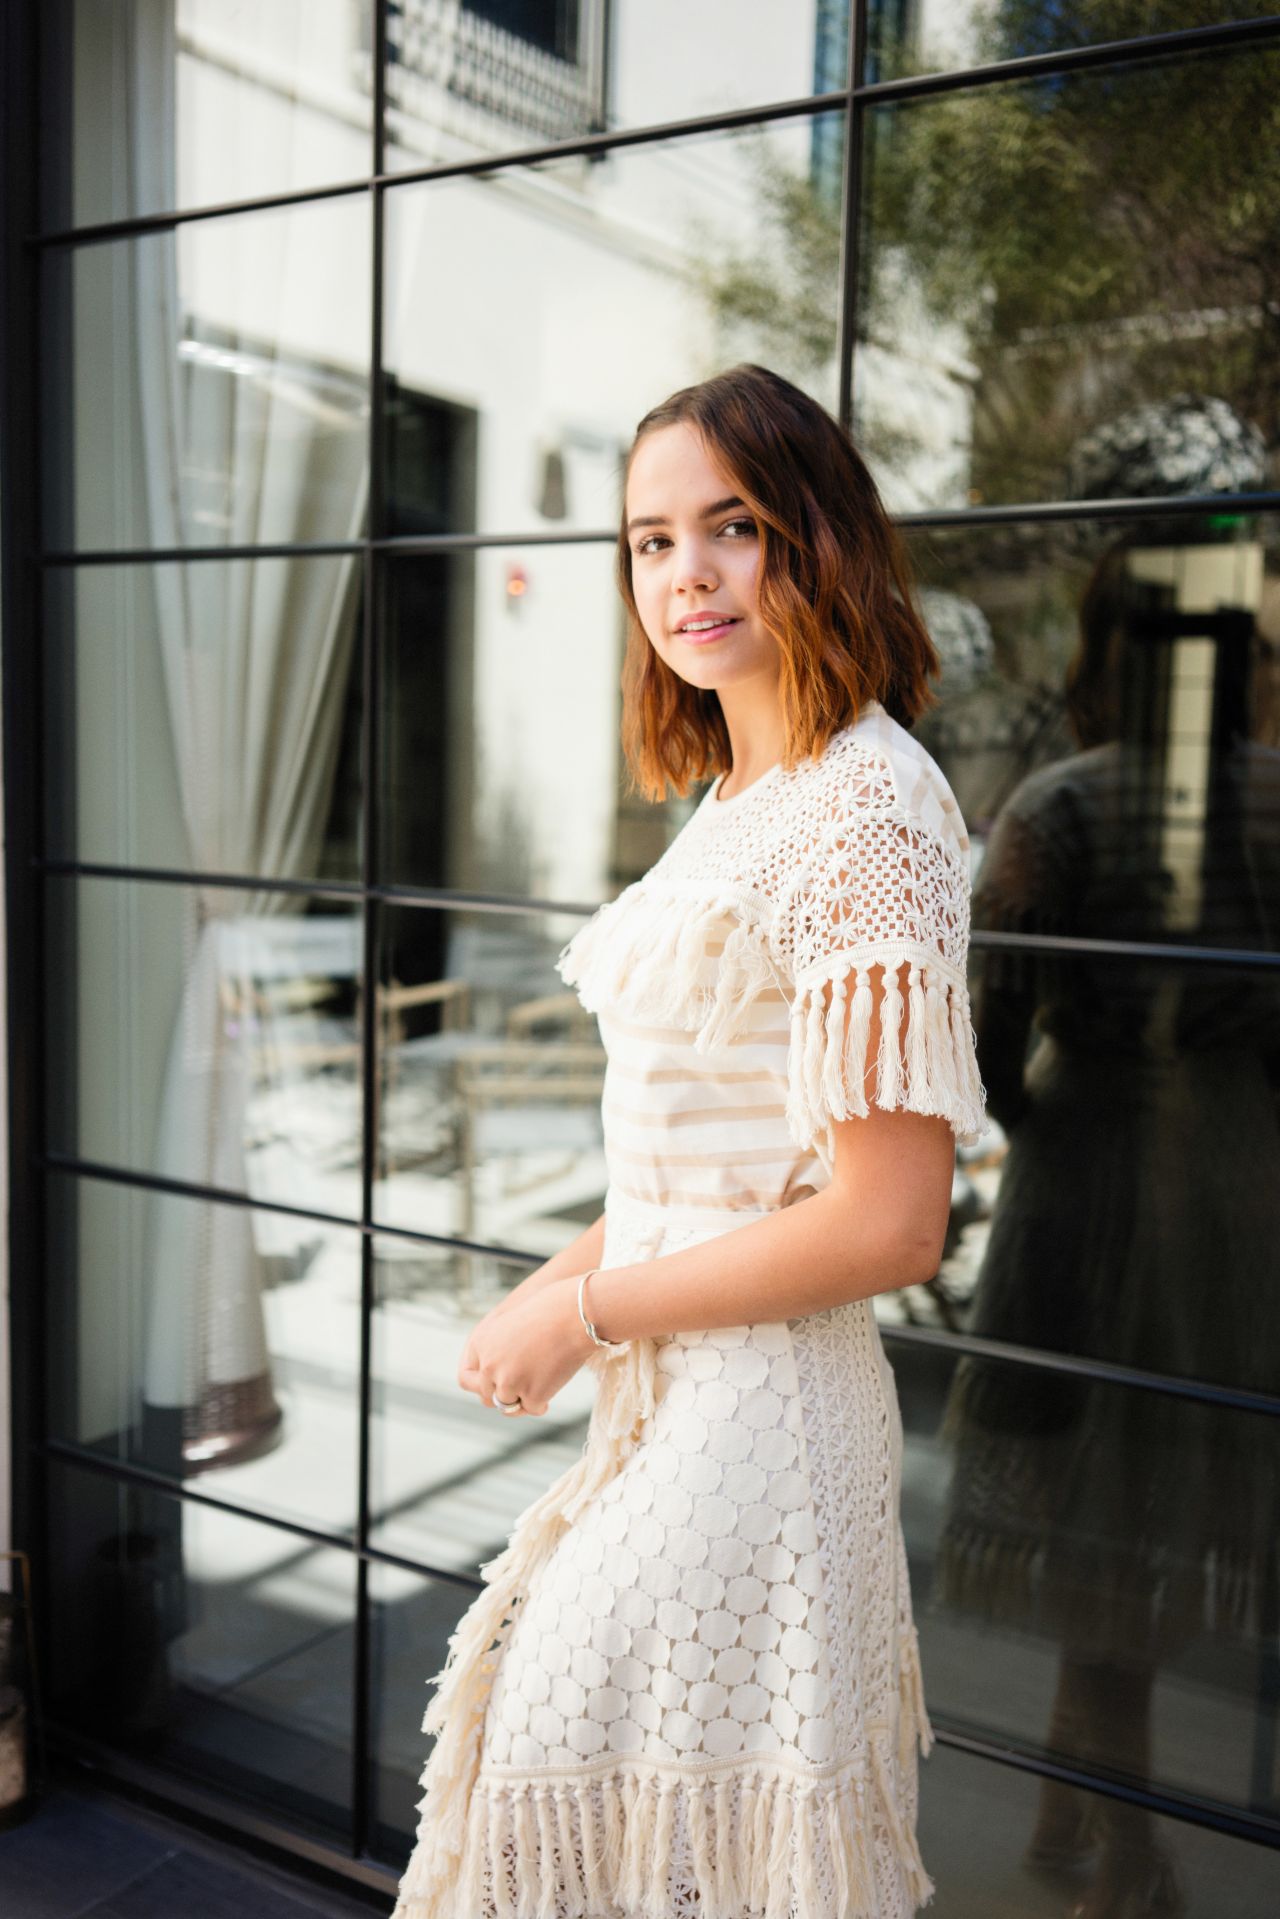 http://www.theplace.ru/archive/bailee_madison/img/bailee_madison_inside_teen_vogue_s_young_hollywood_class_of_2018_lunch_in_la_2.jpg